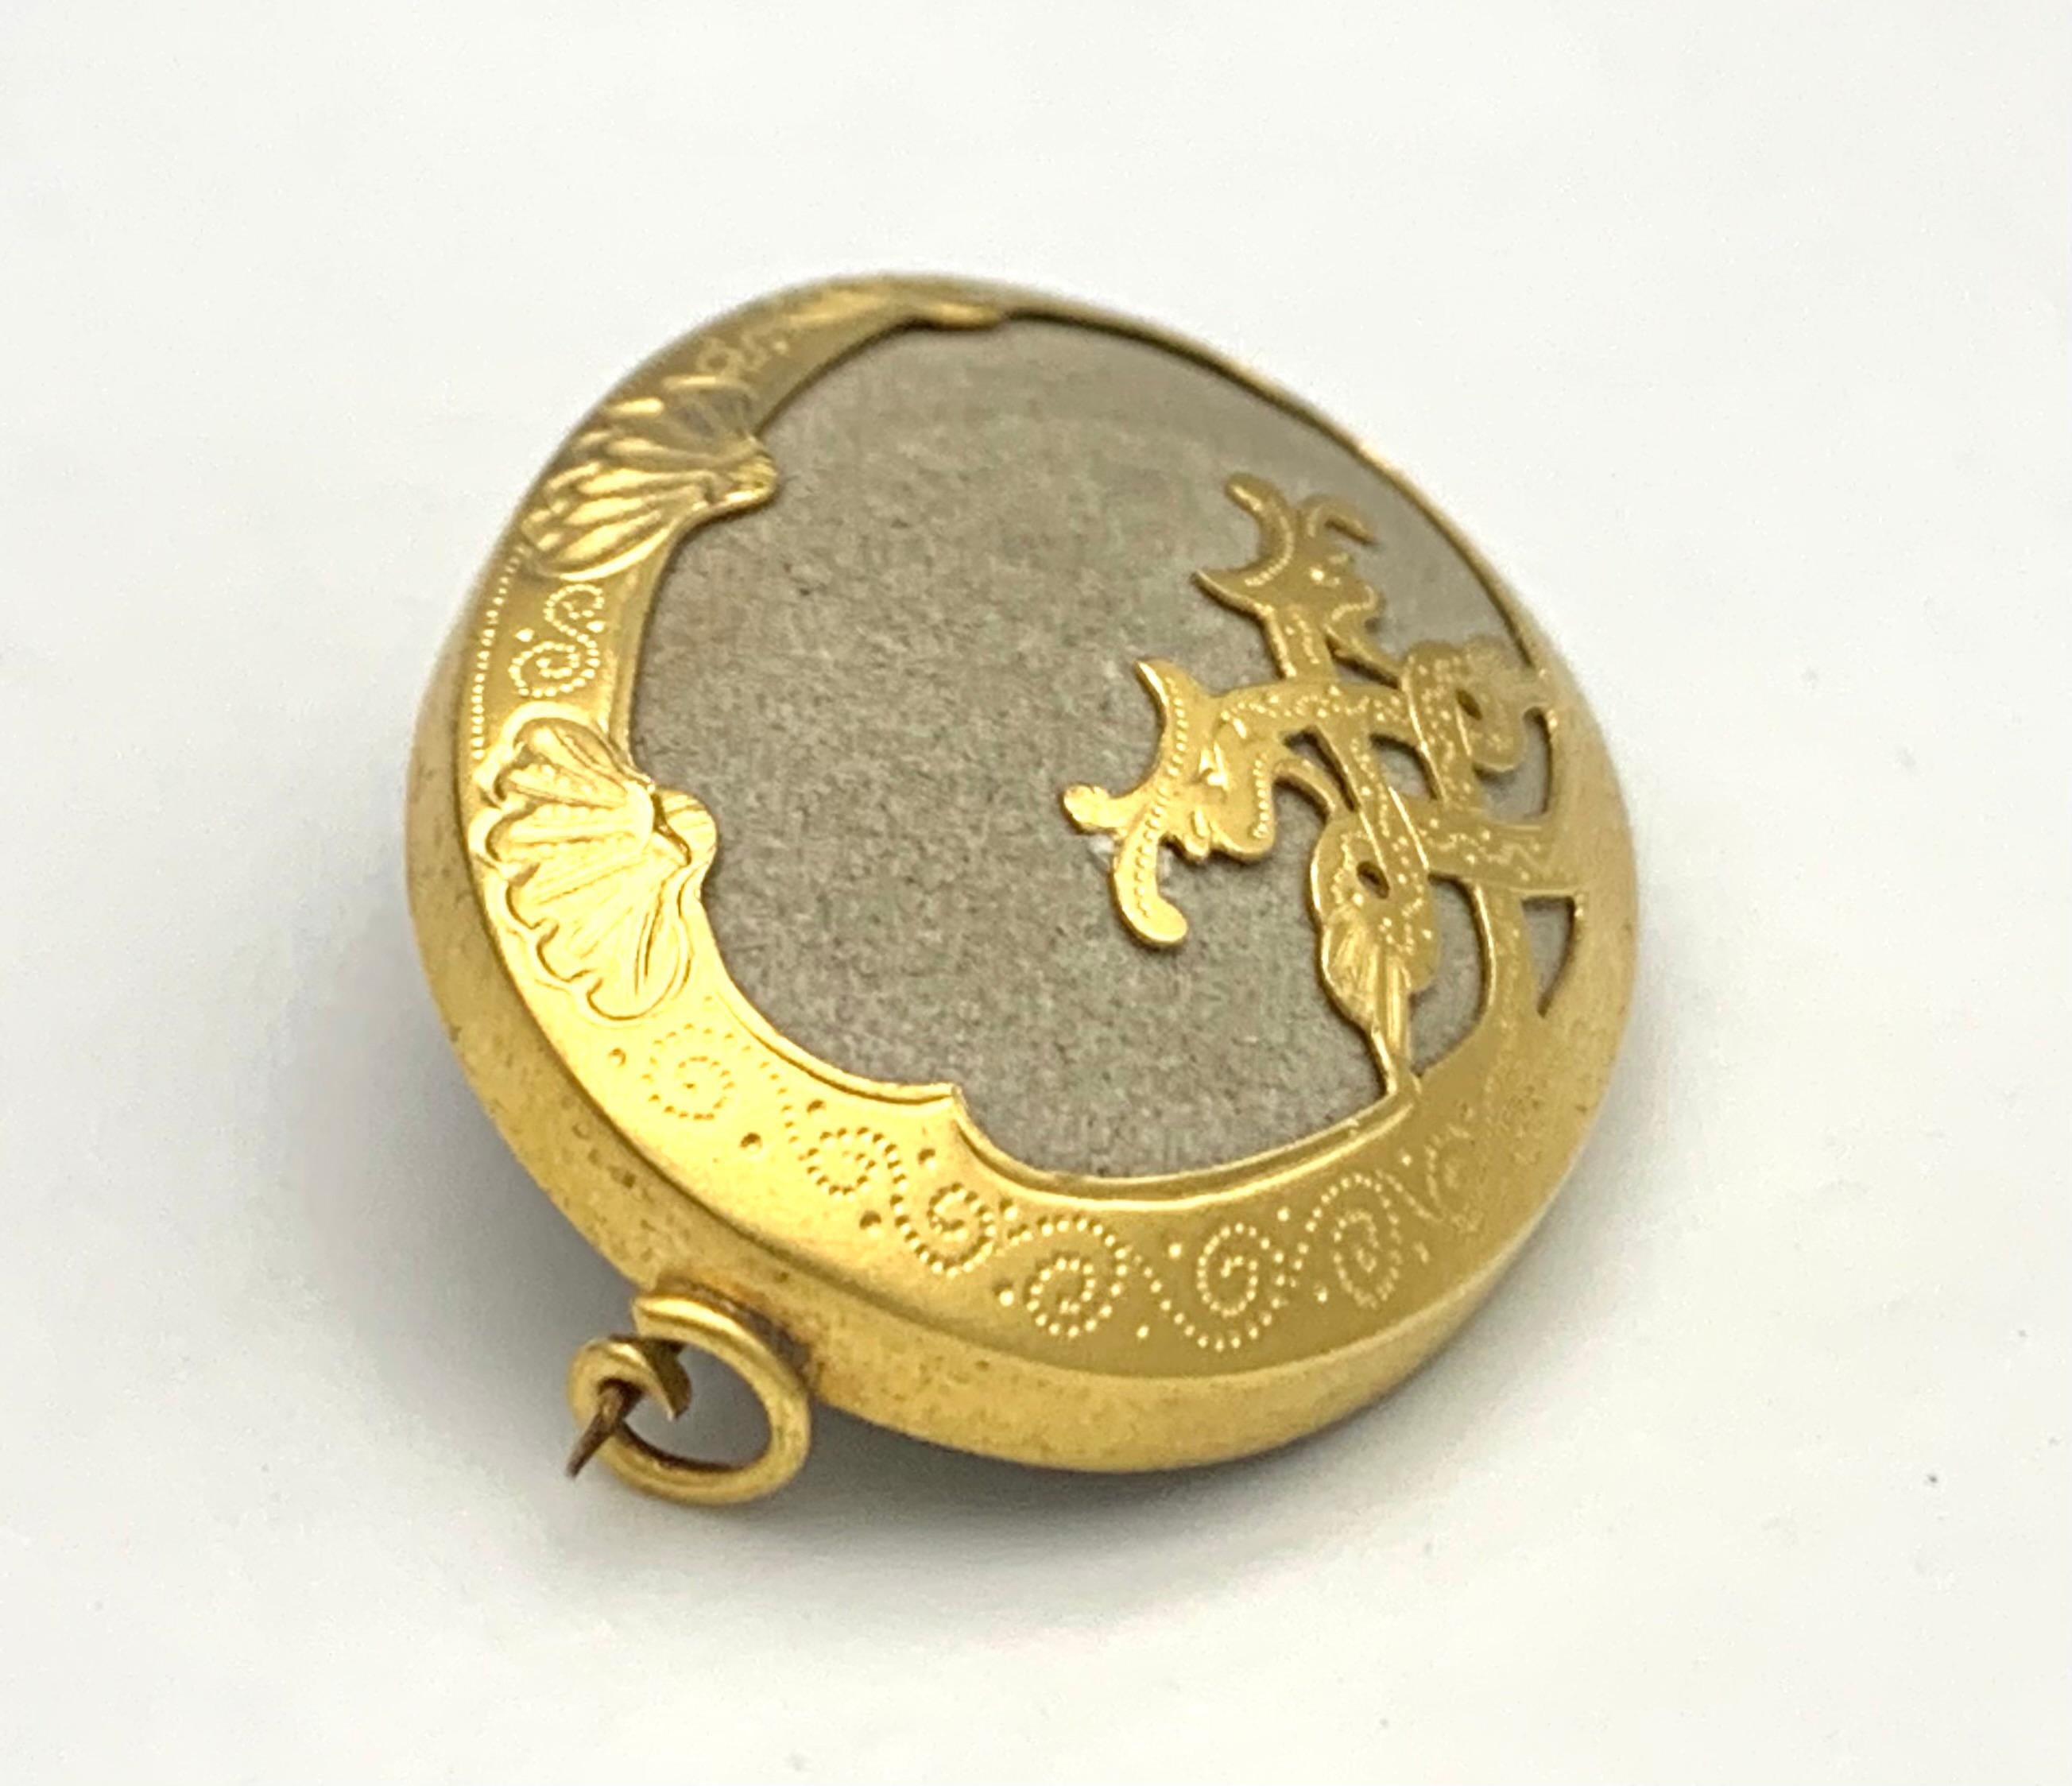 This highly unusual piece of jewellery in the shape of a gold mounted pebble was made in the mid 19th century. The gold decoration in the shape of two snakes entwined to form an infinity symbol is quite out of the ordinary. Maybe the brooch was made